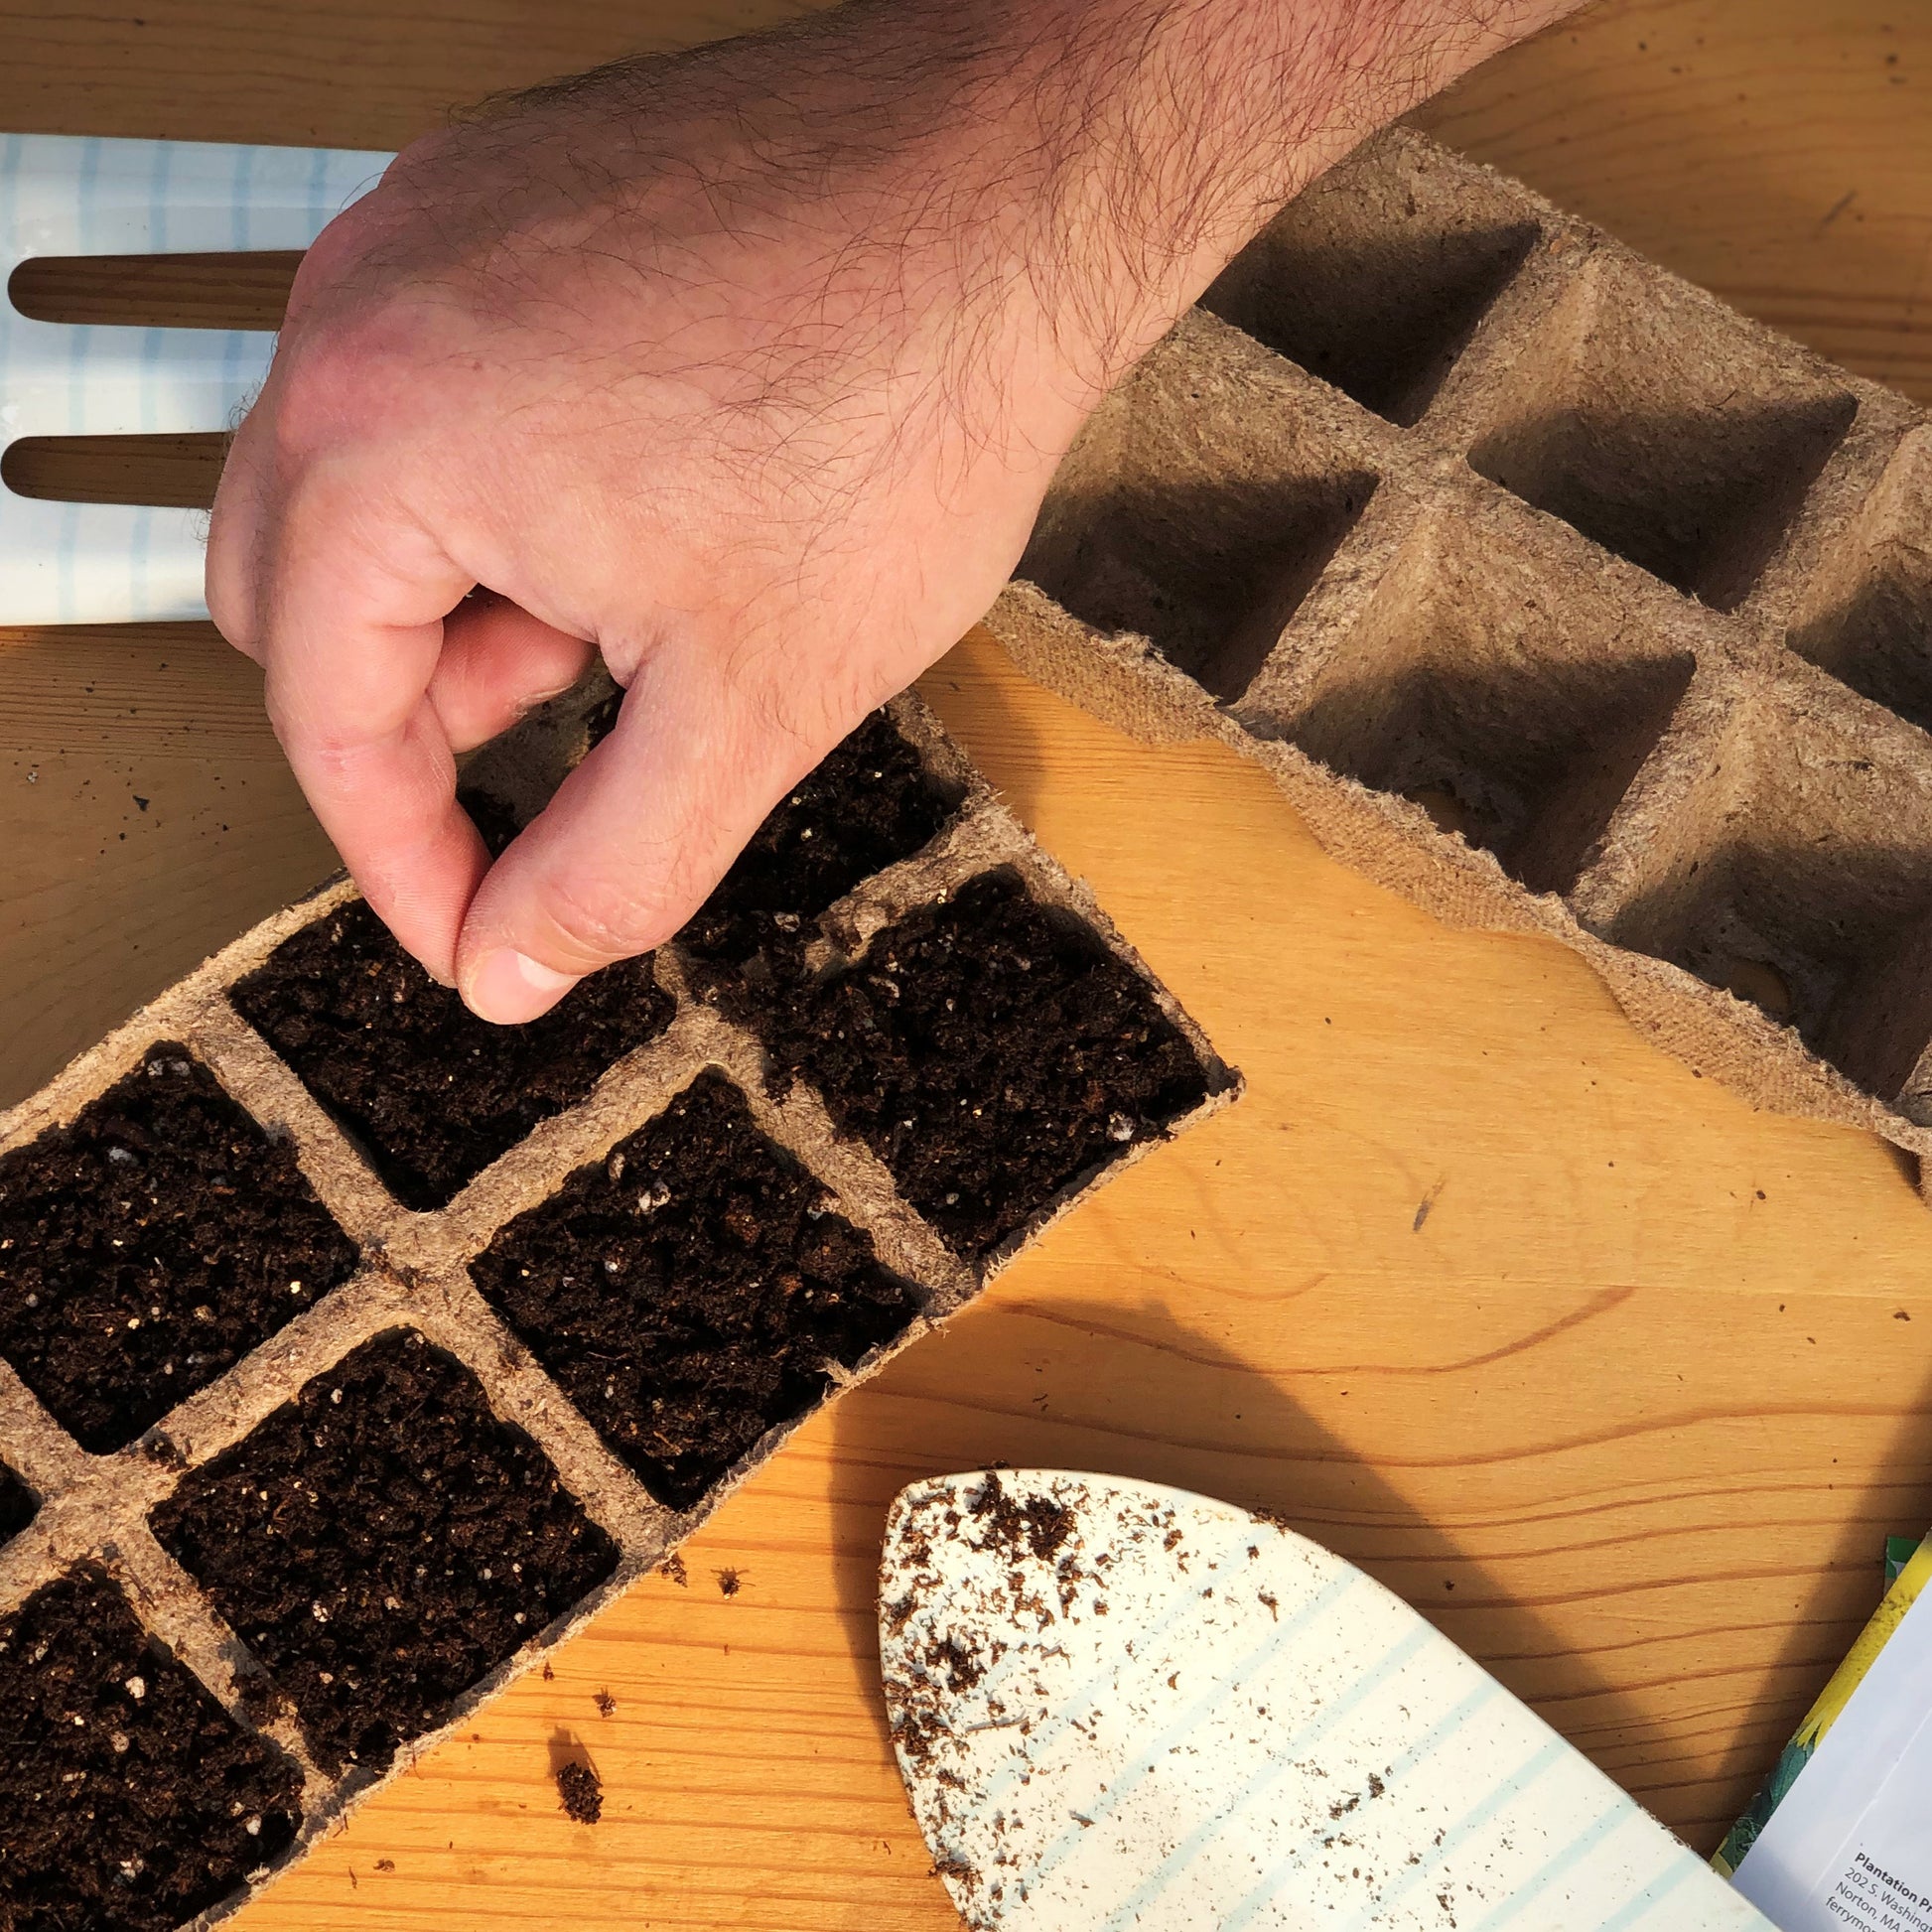 Starting your Red Russian Kale Seeds in biodegradable Jiffy peat strip trays which easily tear apart when you are ready to transplant your seedlings into their forever homes.